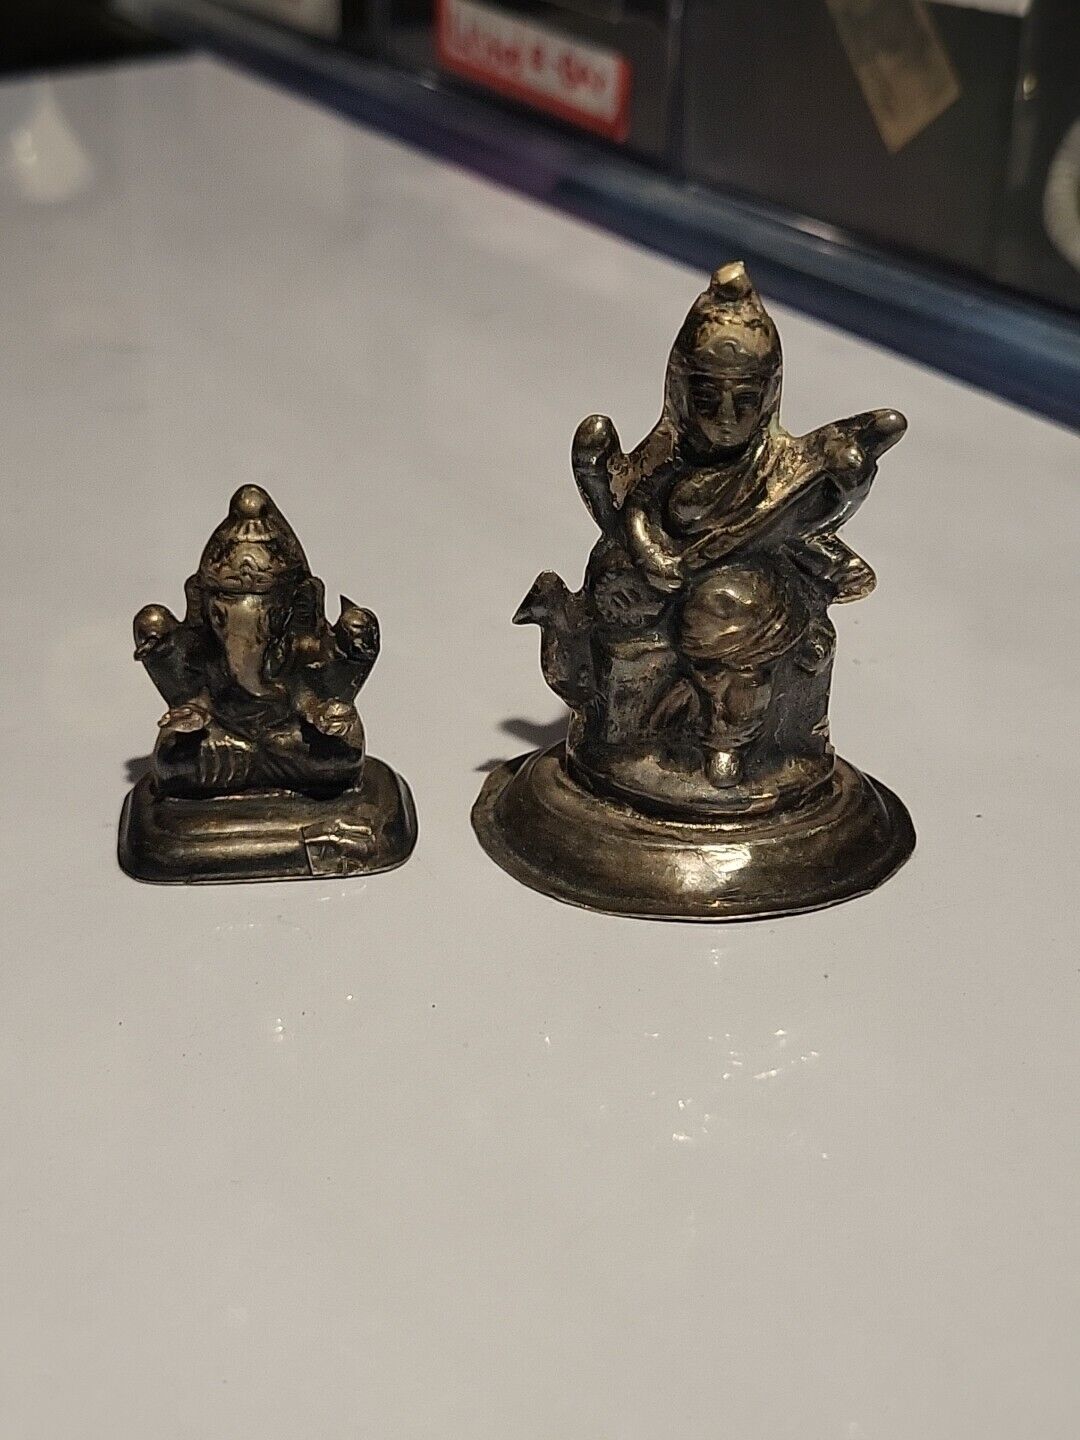 Antique Sterling Silver Figures Laxmi godess statue idol Set Of 2 Figures 1800s 